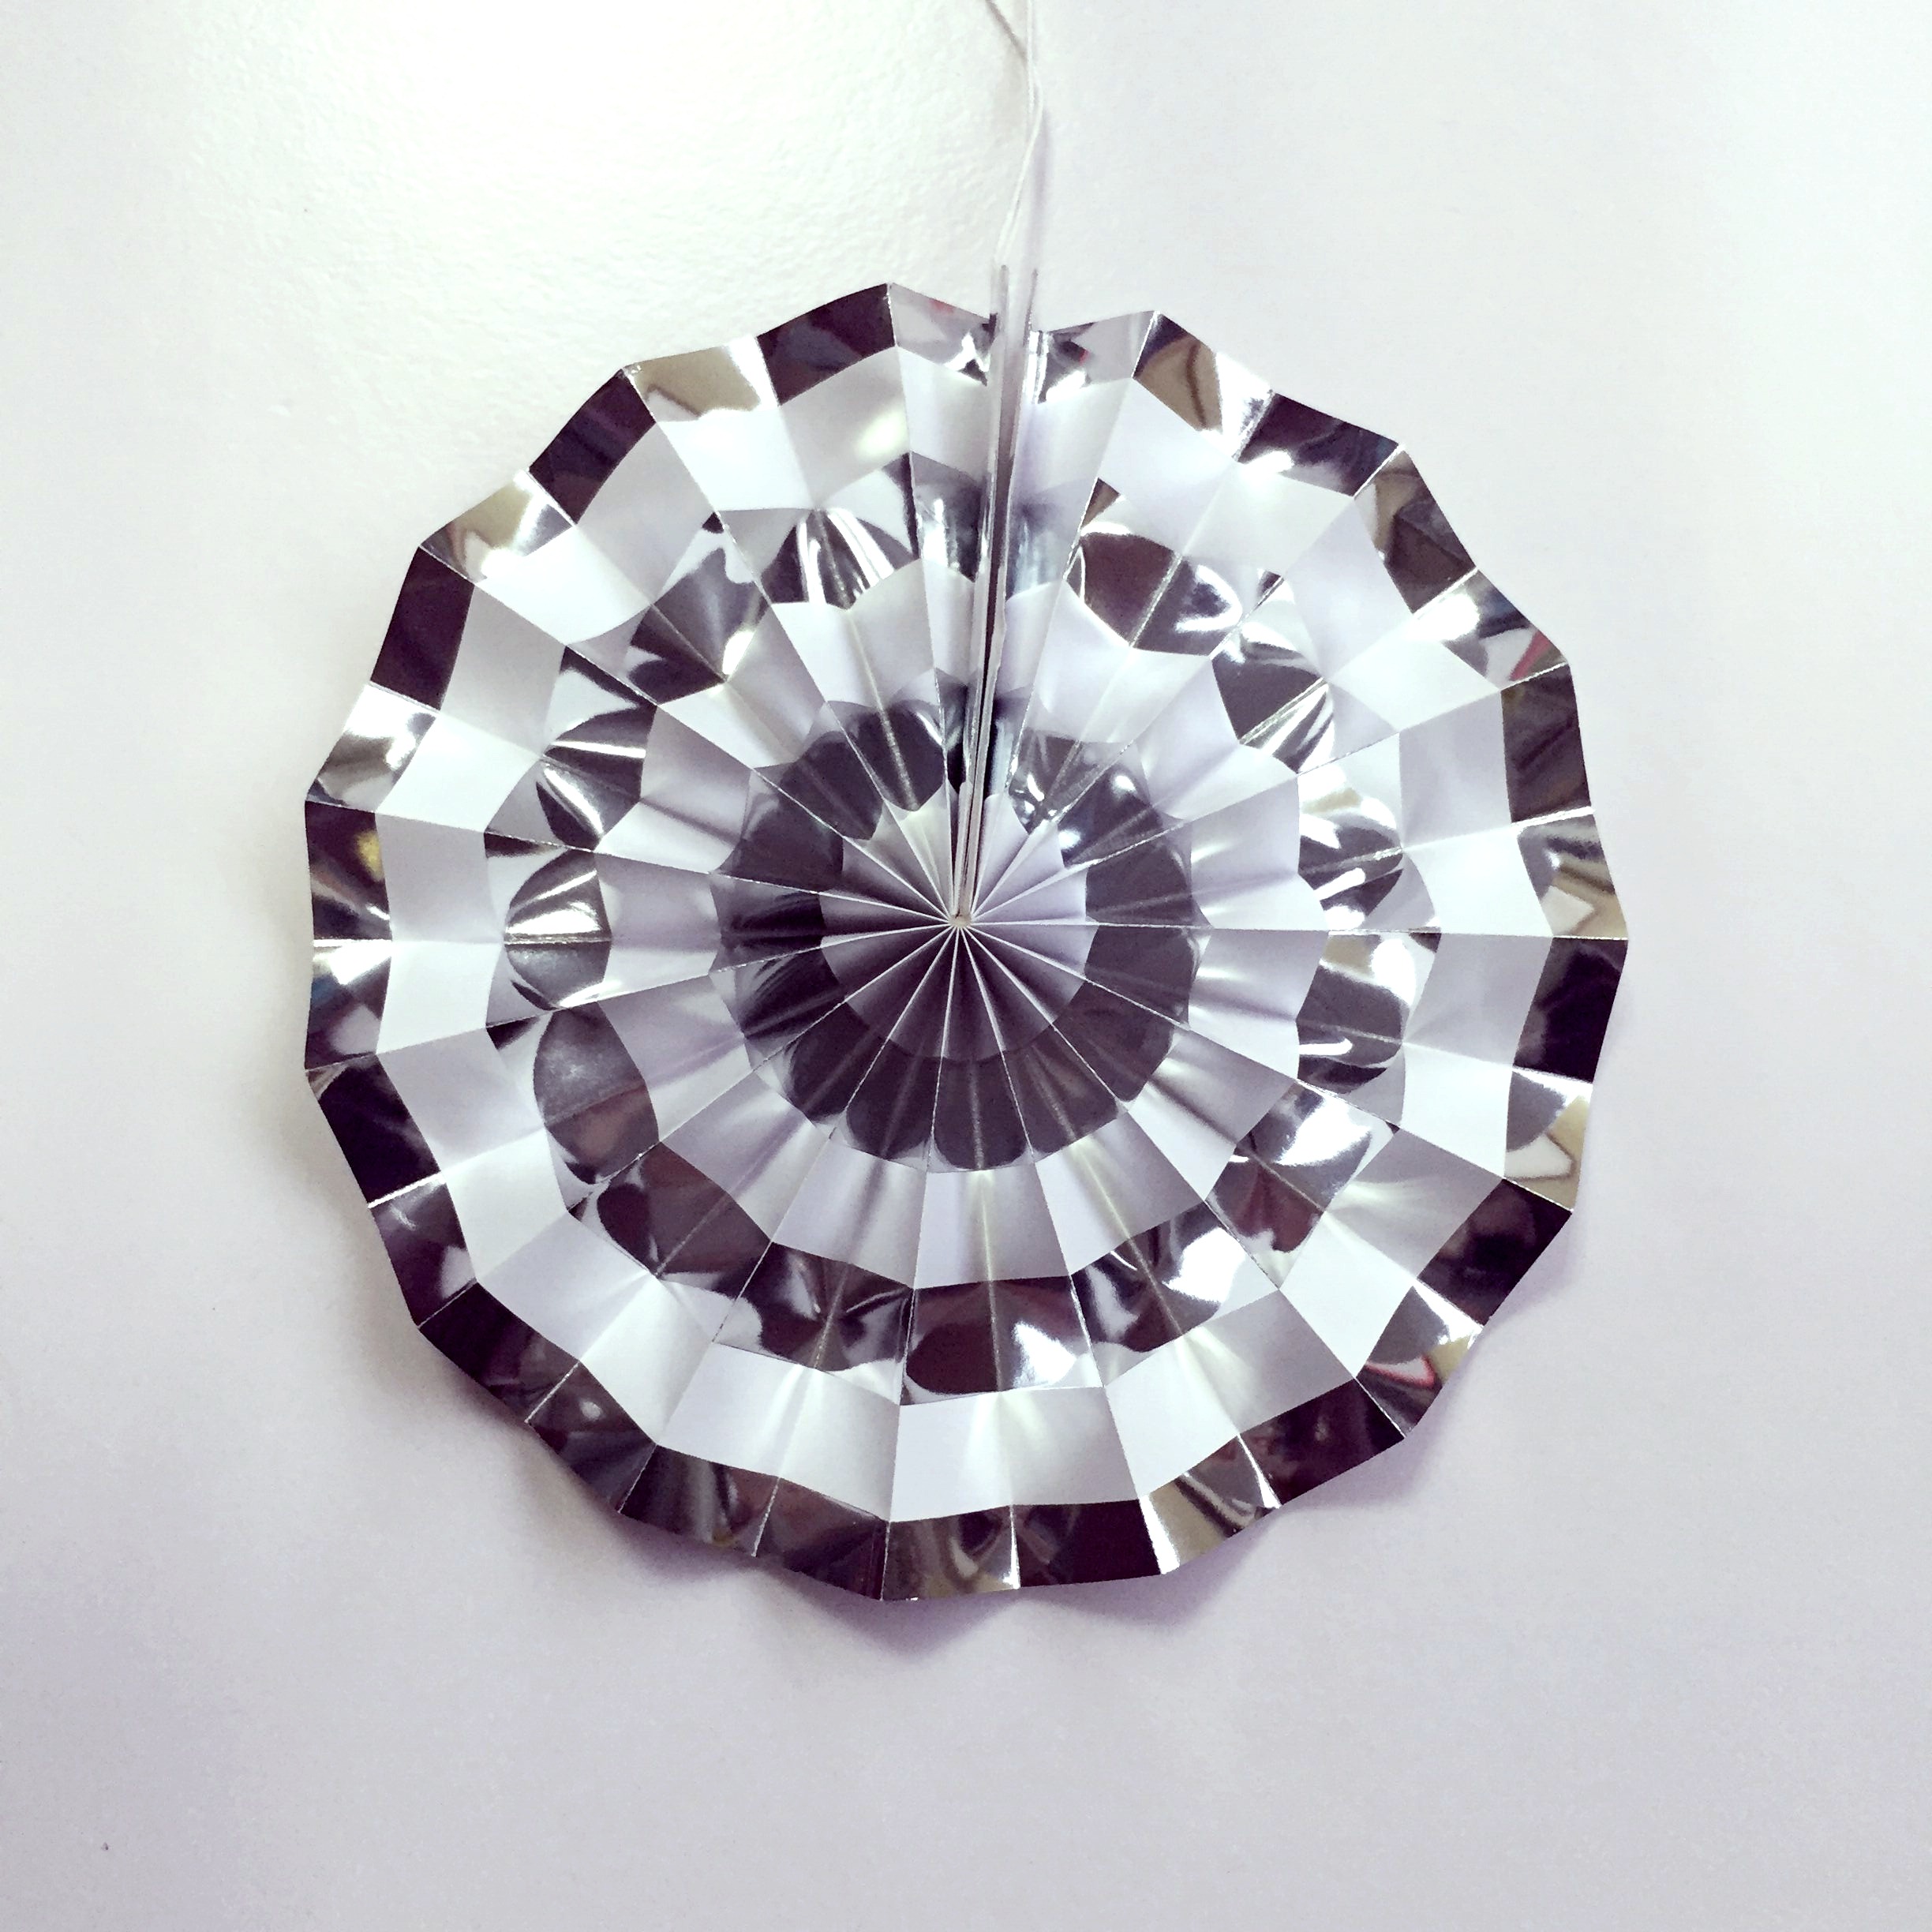 silver folding paper fan for party decoration